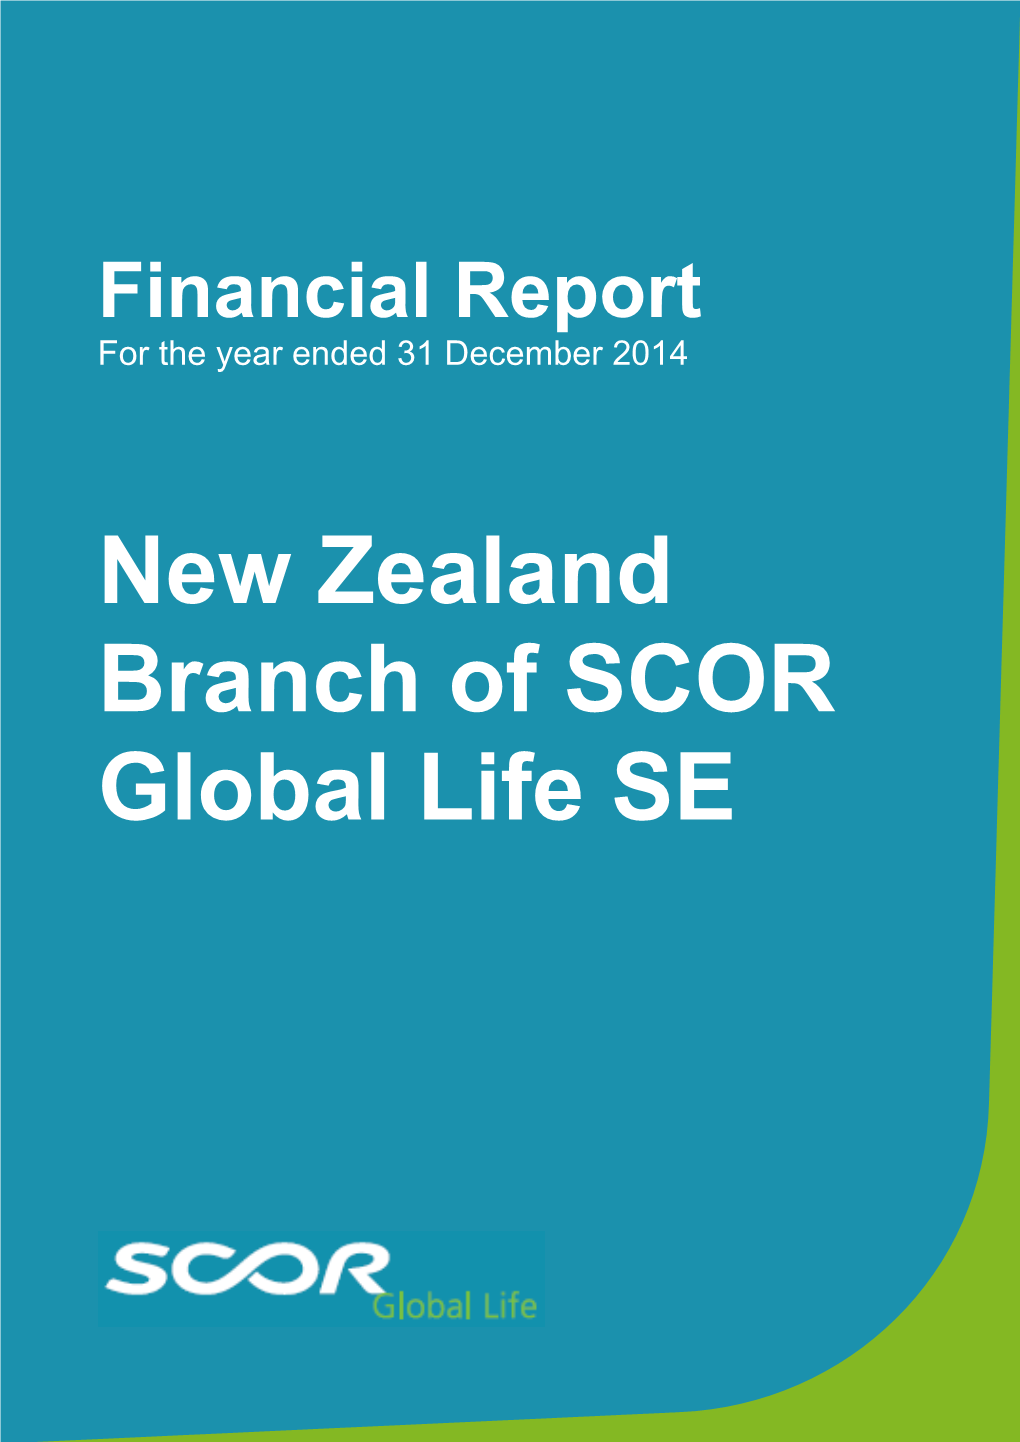 New Zealand Branch of SCOR Global Life SE for the Year from 1 January 2014 to 31 December 2014